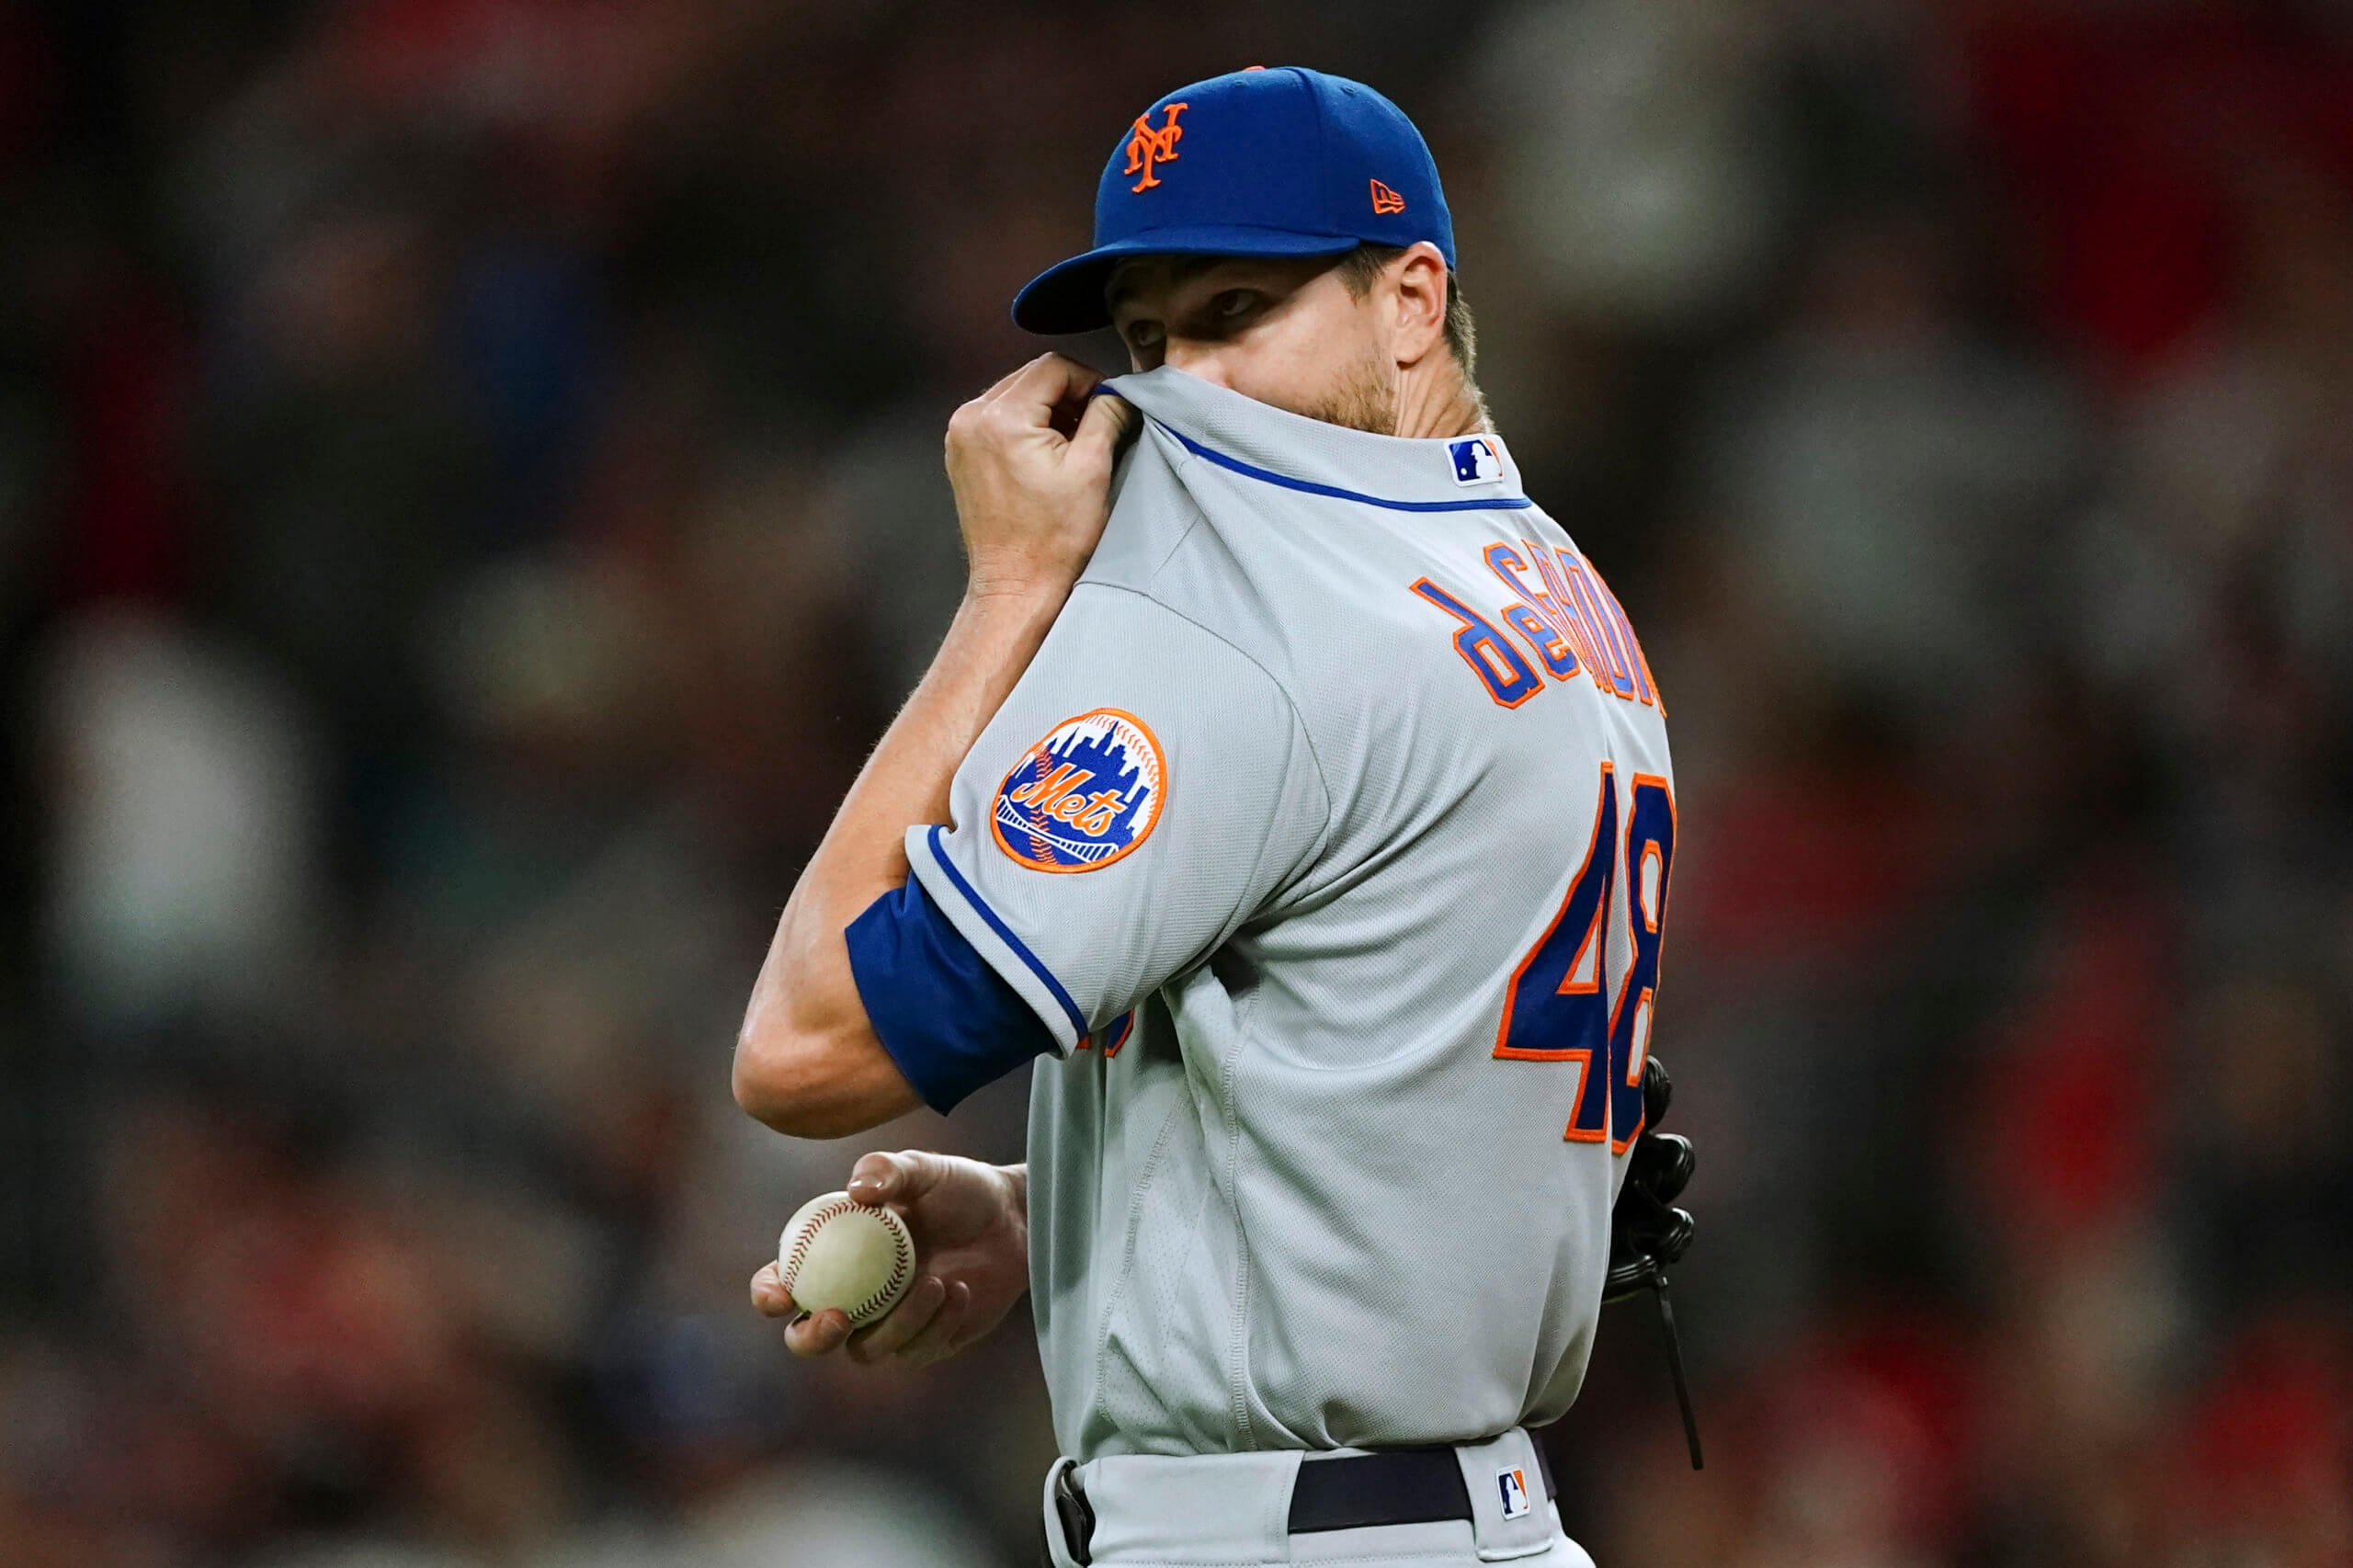 Ex-Mets ace Jacob deGrom bounces back with Rangers after injury concerns 